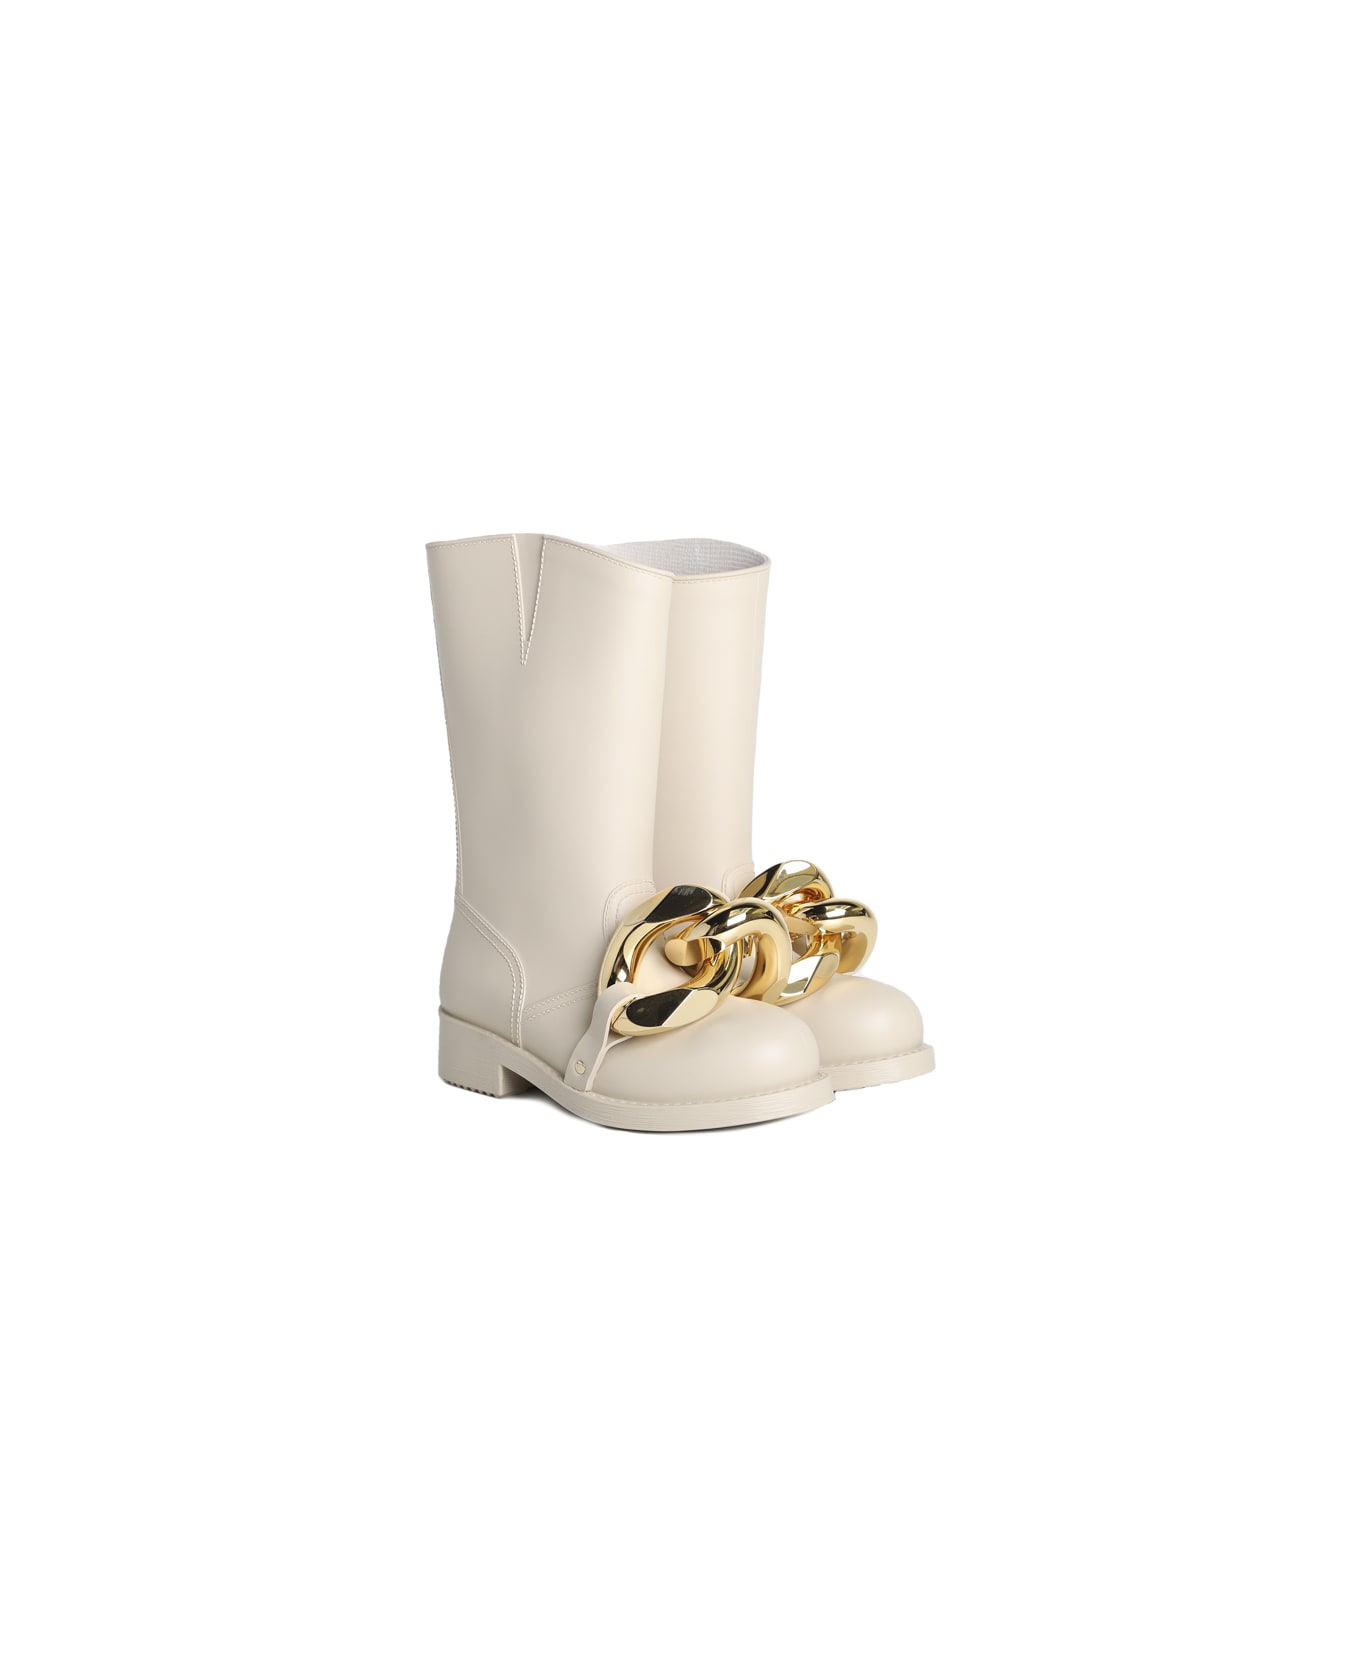 J.W. Anderson Chain Boots In Rubber - Beige